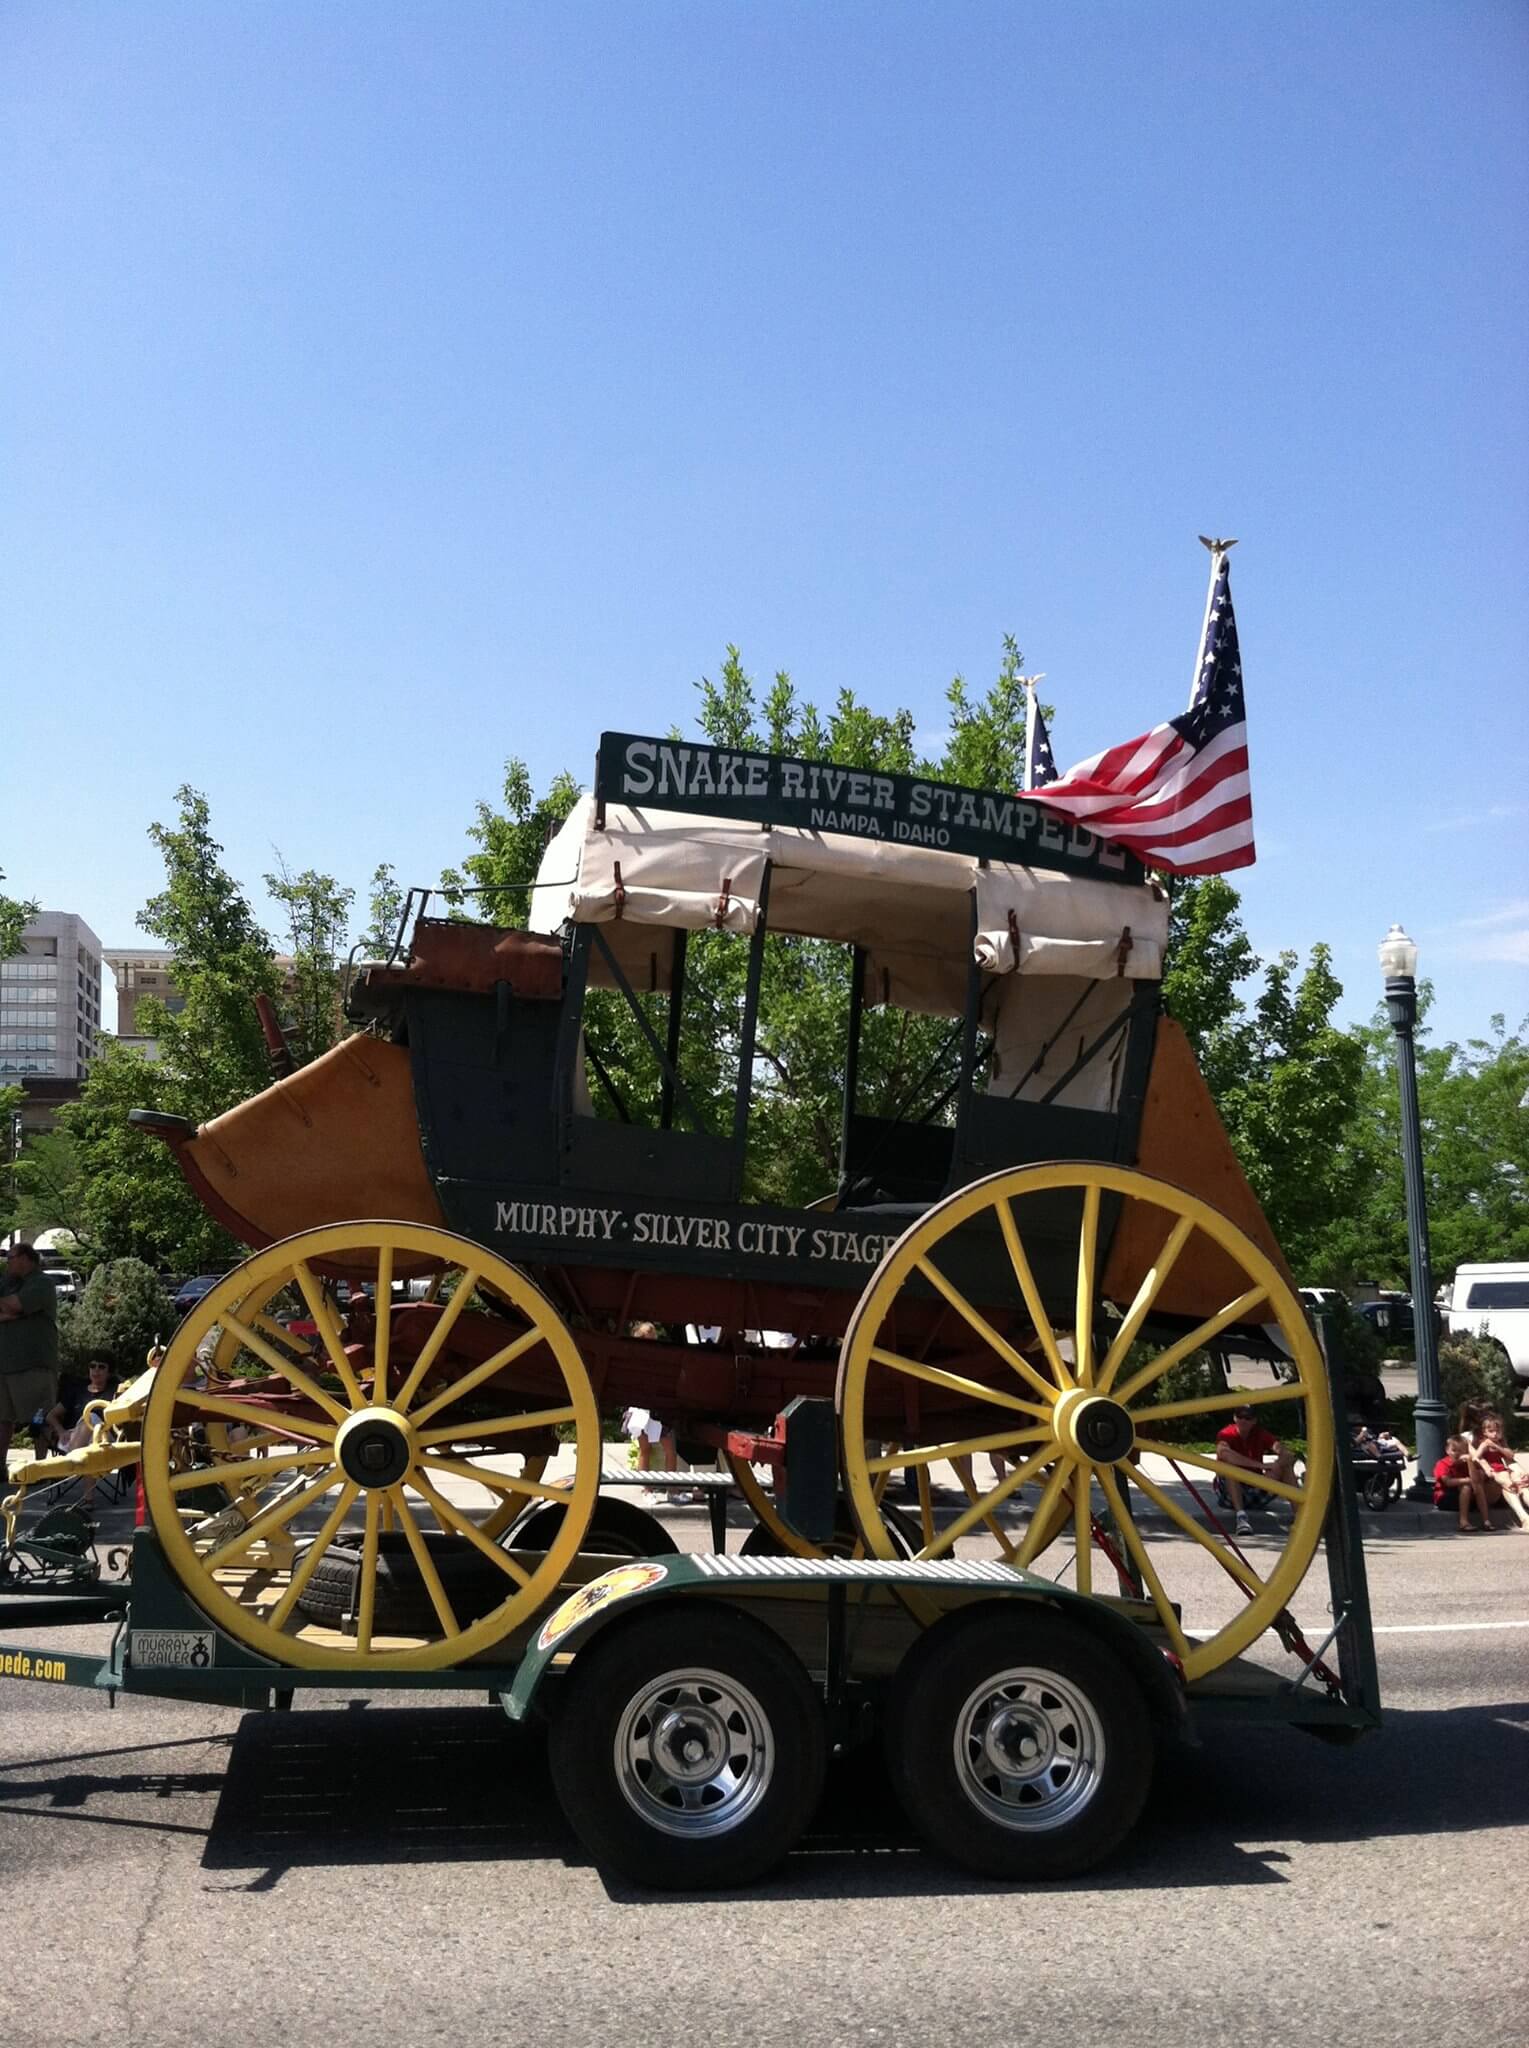 Historic Snake River Stampede stage coach displayed during the Boise 4th of July Parade